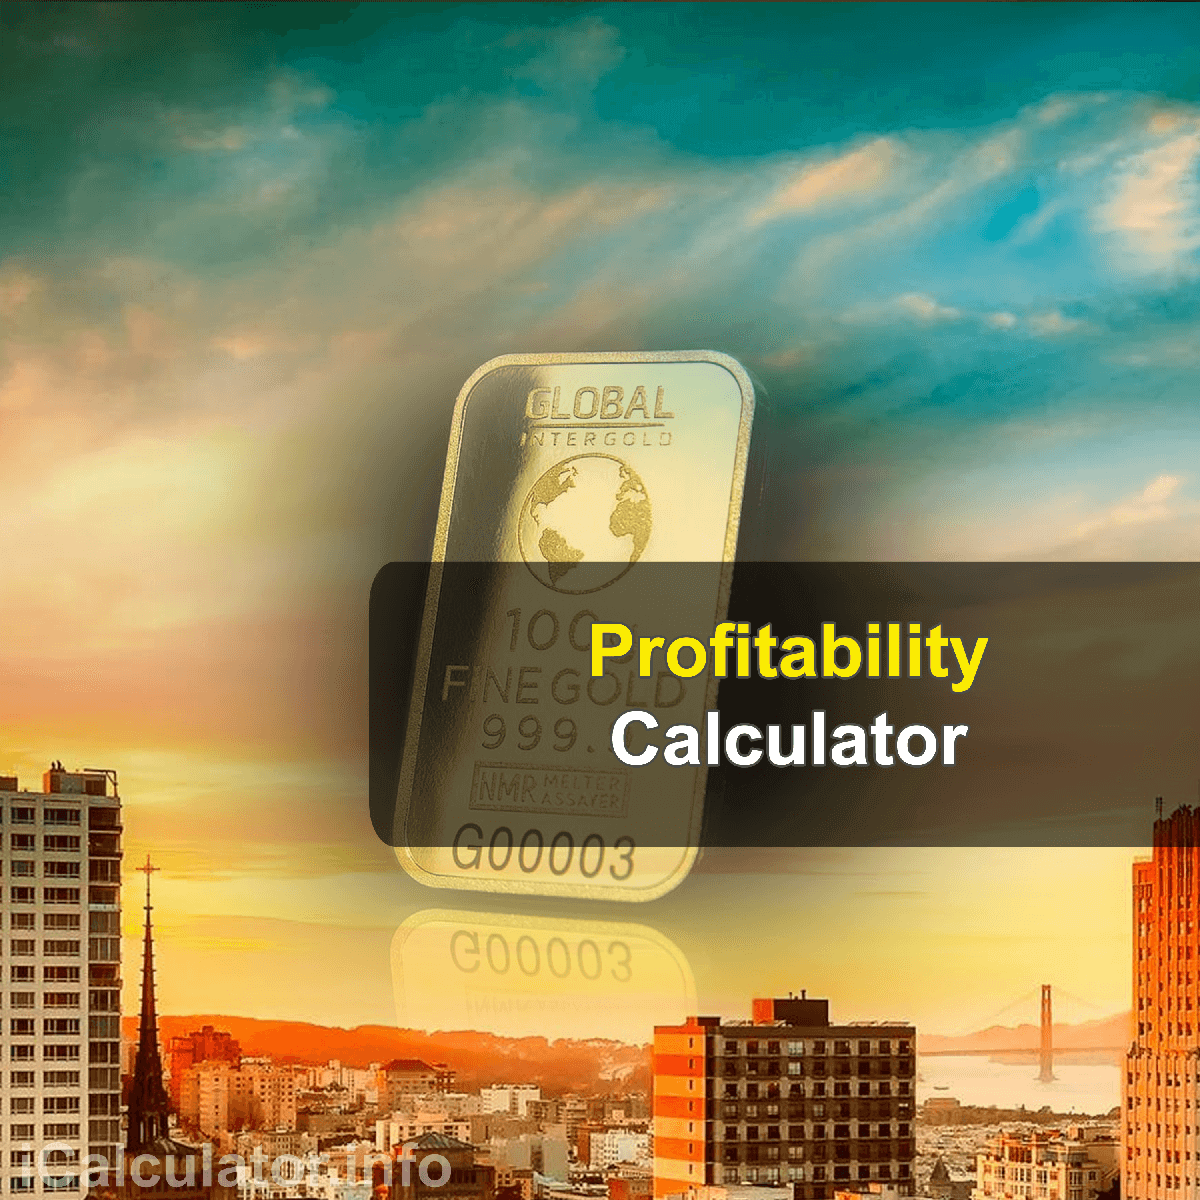 Profitability Index Calculator. This image provides details of how to calculate the profitability index using a calculator and notepad. By using the profibility index ratio formula, the Profitability Index Calculator provides a true calculation of the relationship between cost and benefits of a project.